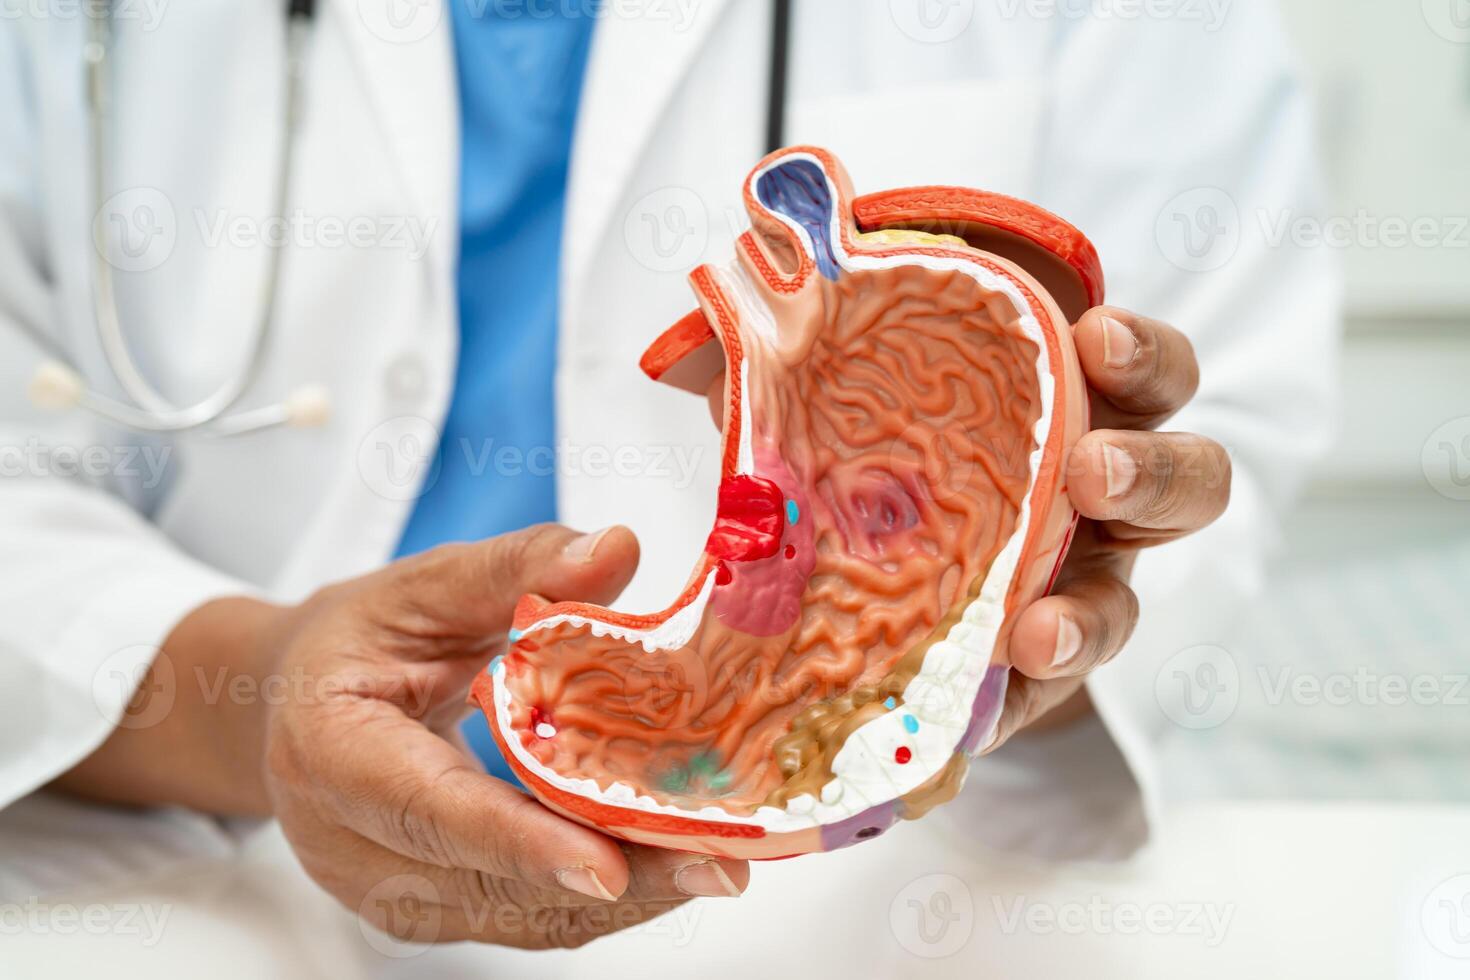 Stomach disease, doctor with anatomy model for study diagnosis and treatment in hospital. photo